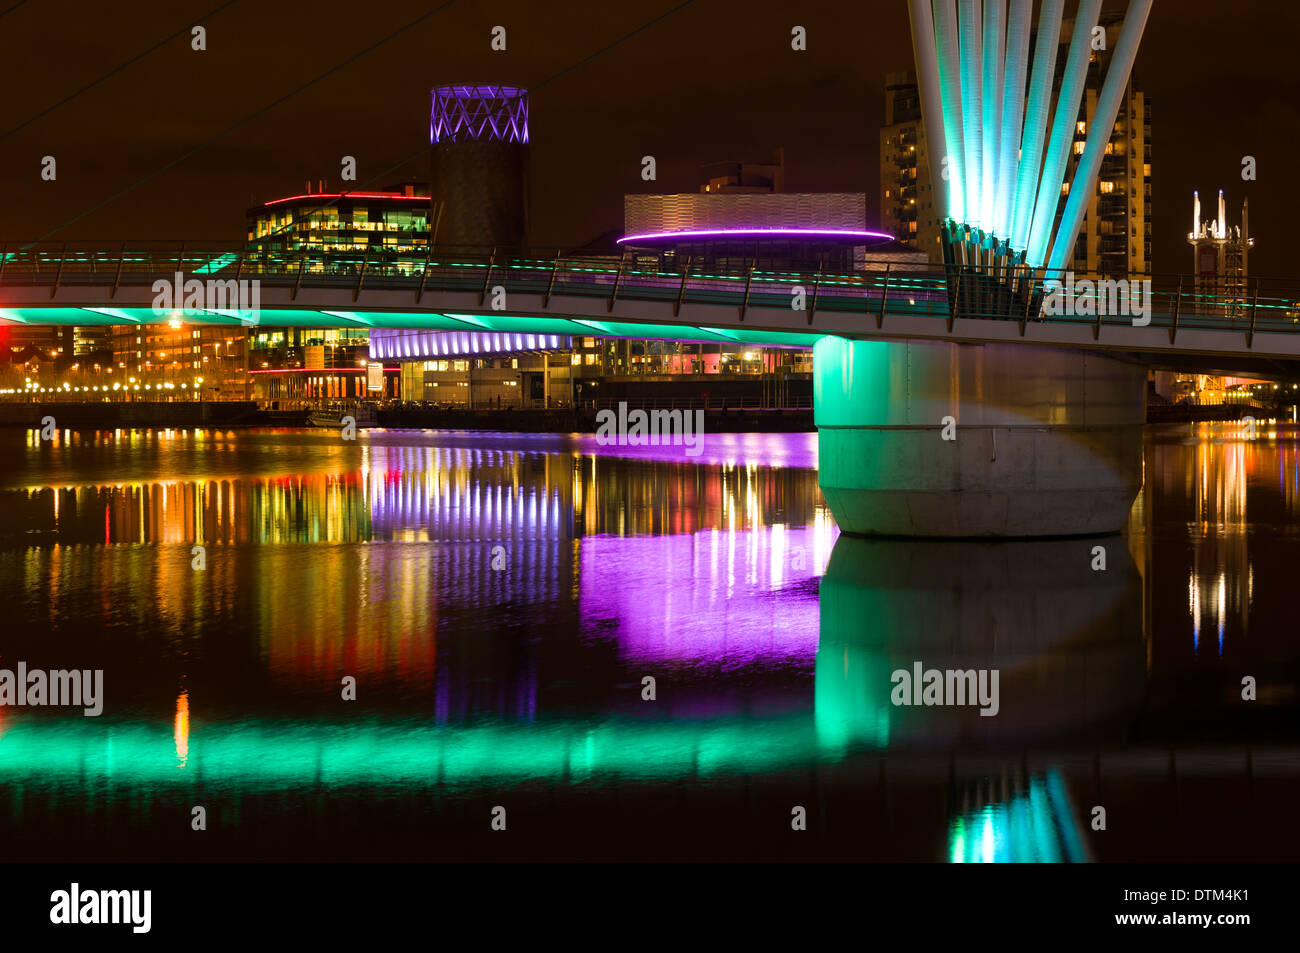 The Lowry arts centre and the MediaCityUK footbridge, over the Manchester Ship Canal at Salford Quays, Manchester, England, UK. Stock Photo